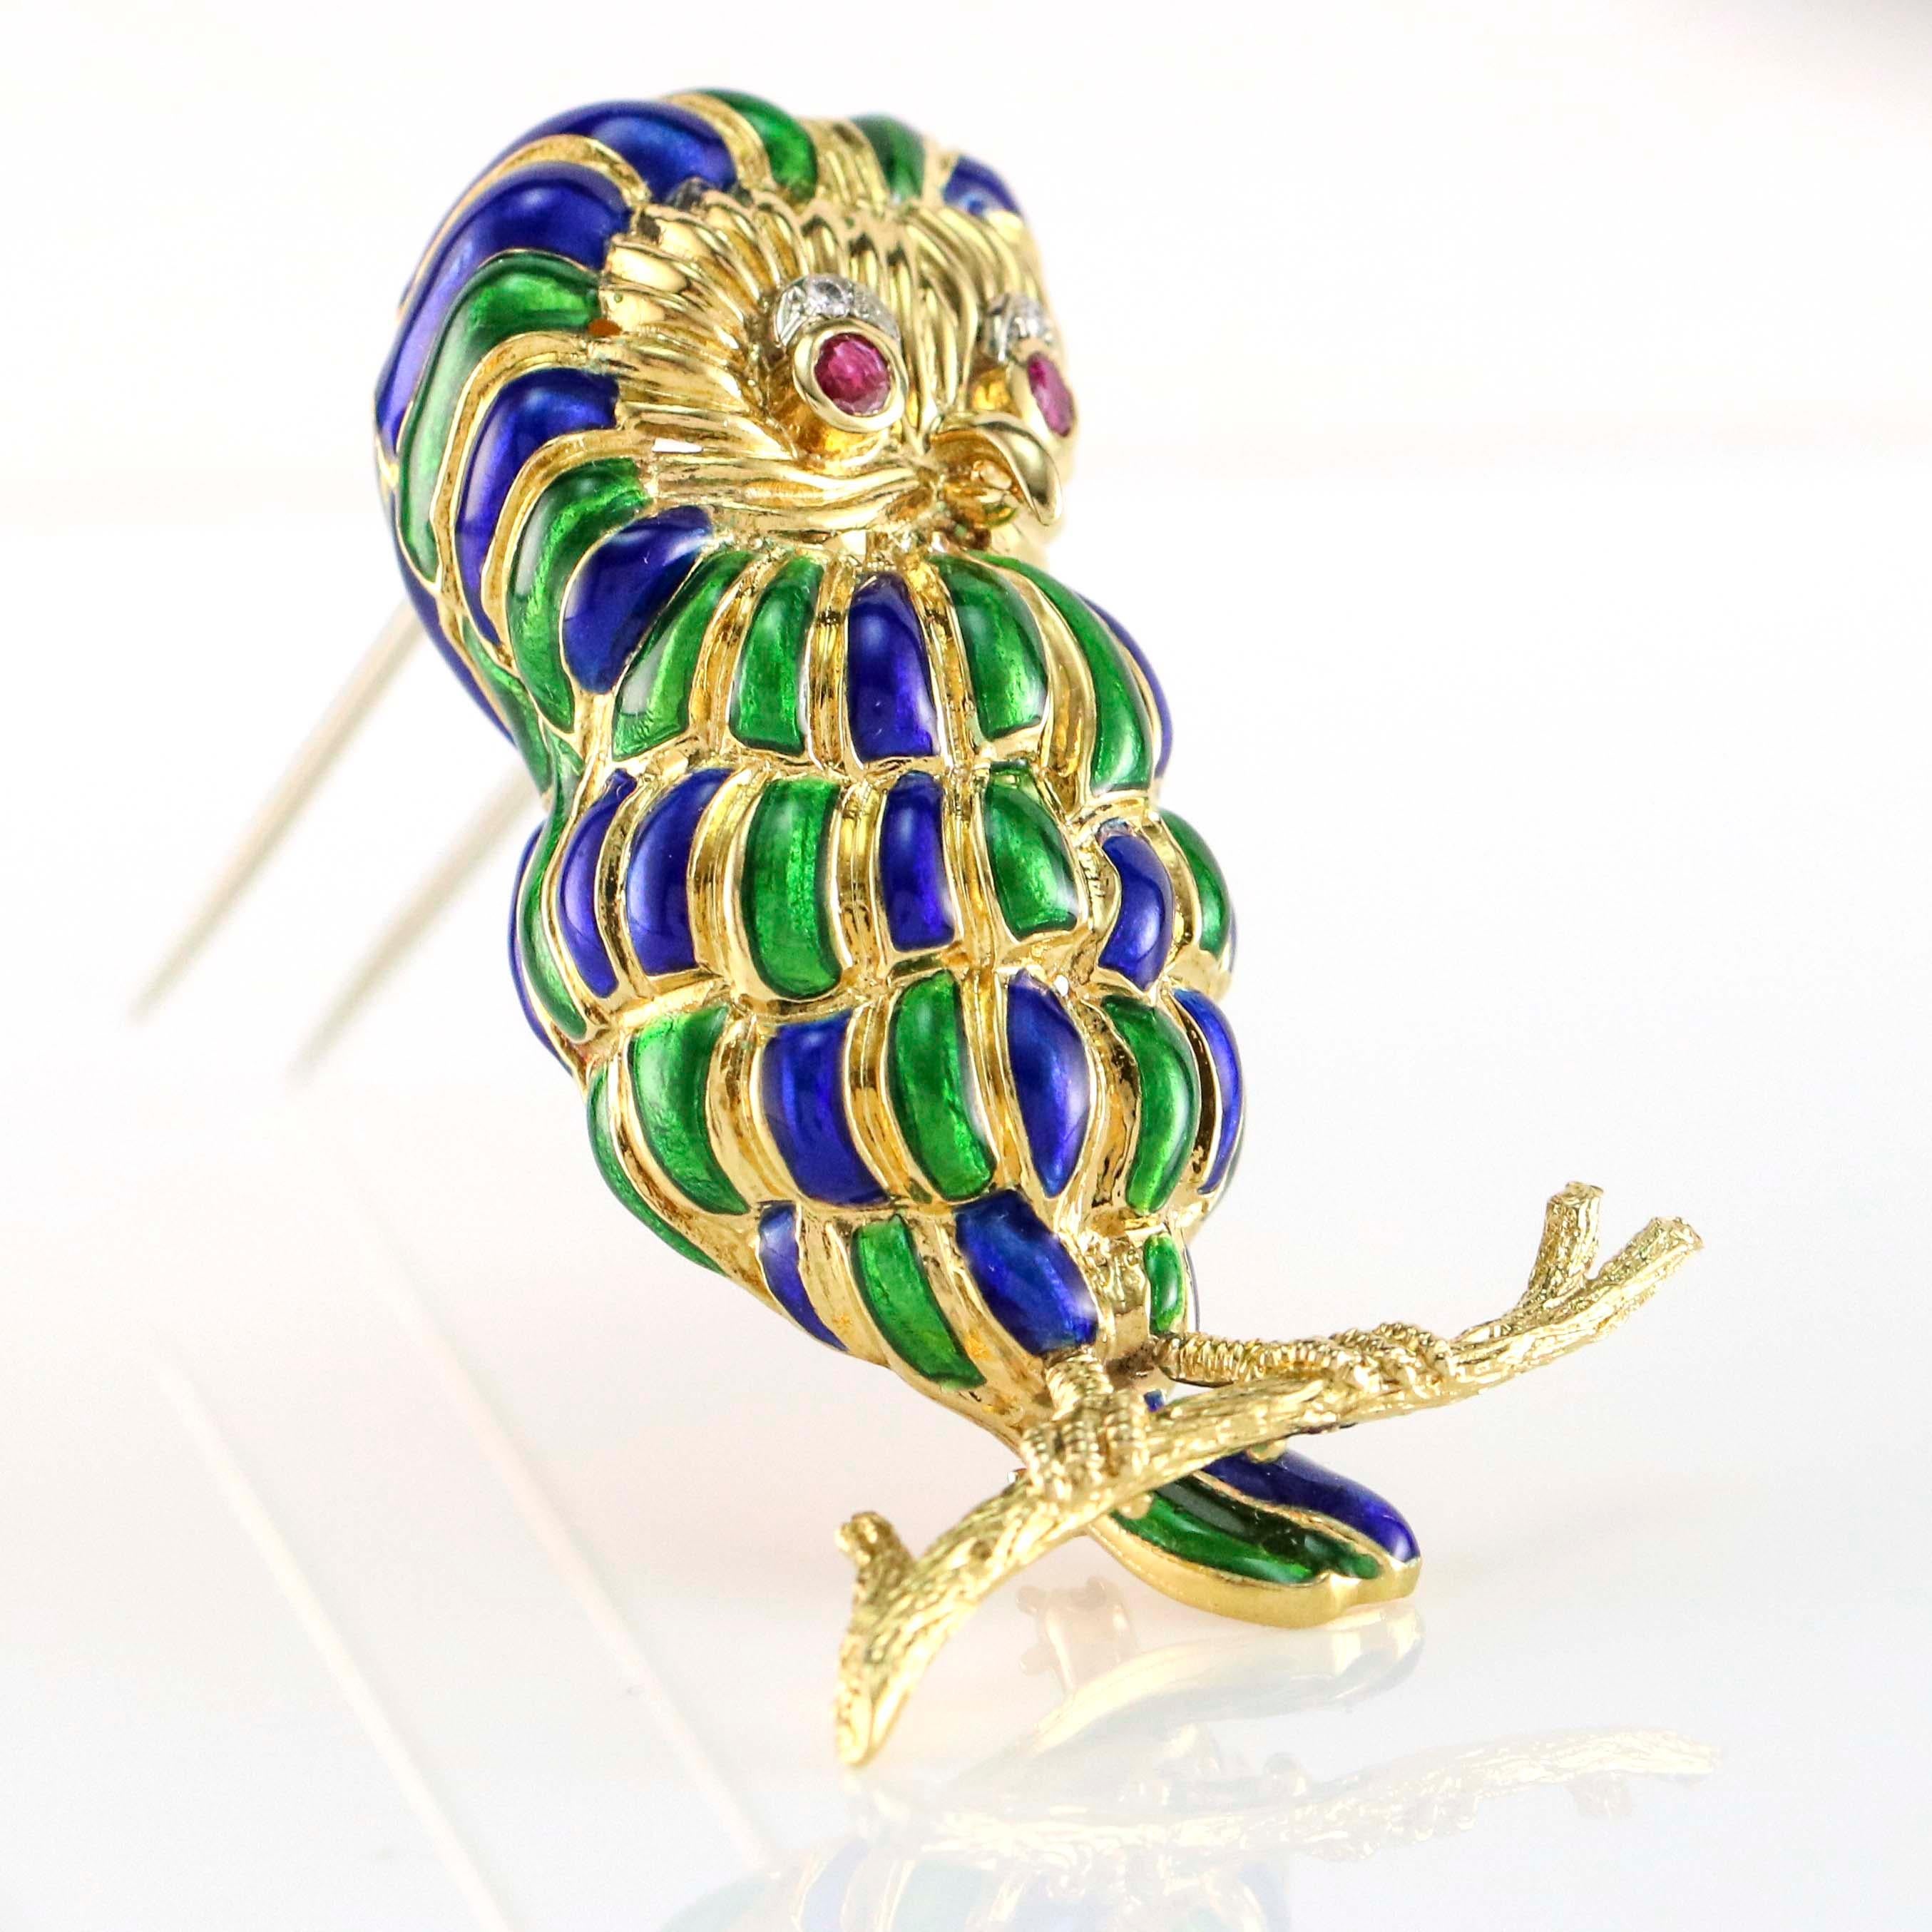 Owl sitting on branch with ruby eyes, blue and green enamel details crafted in 18k yellow gold.